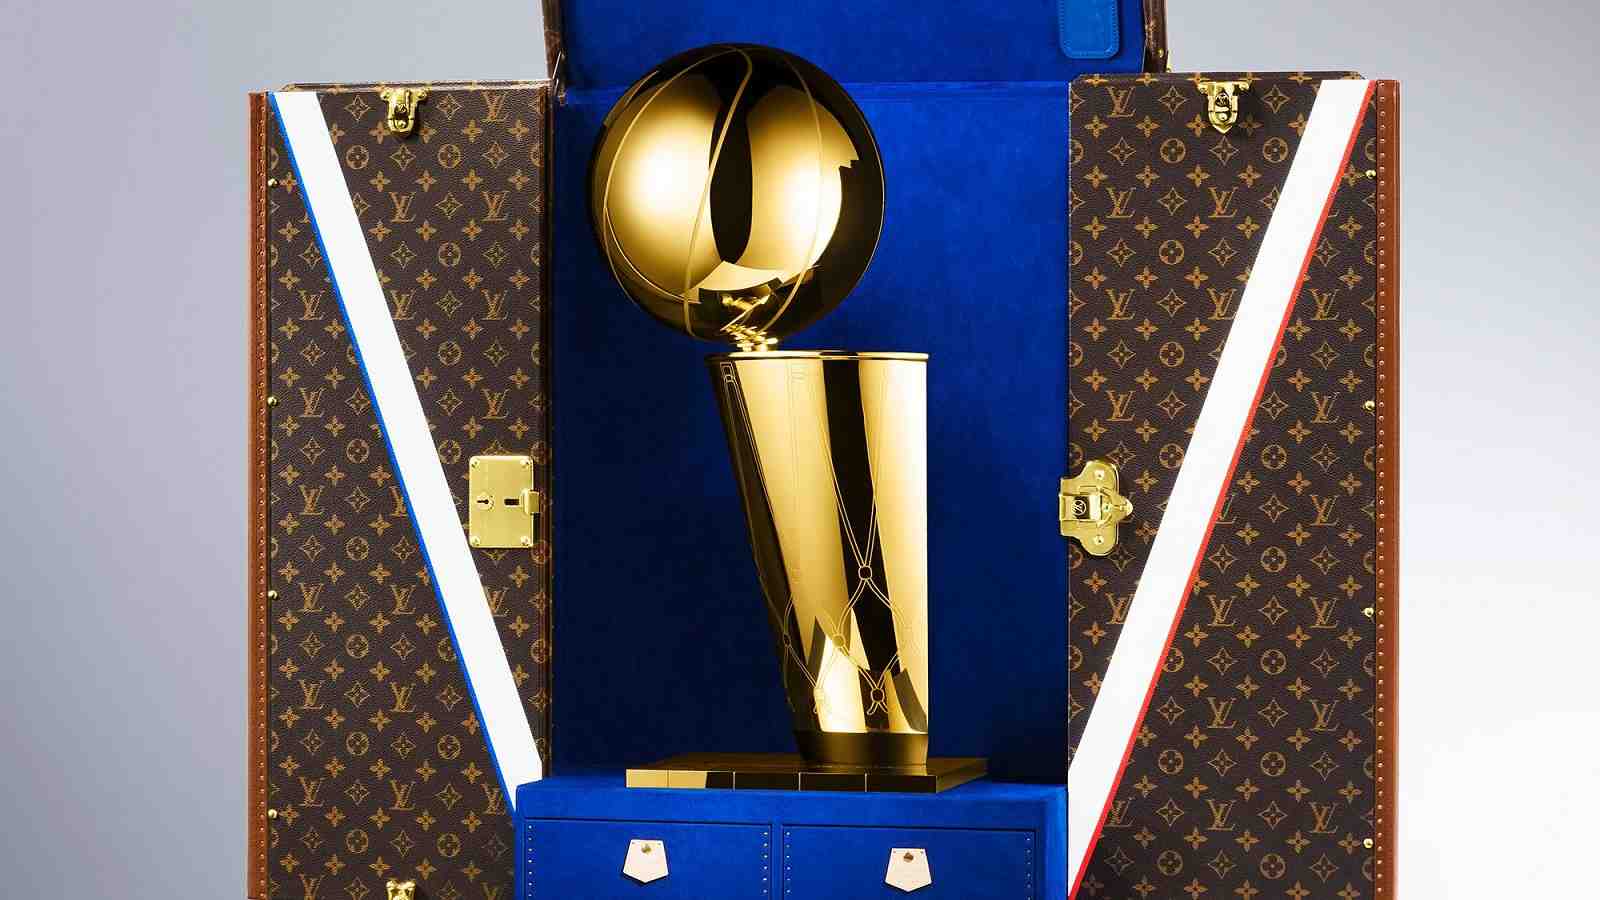 LOUIS VUITTON PARTNERED WITH NBA